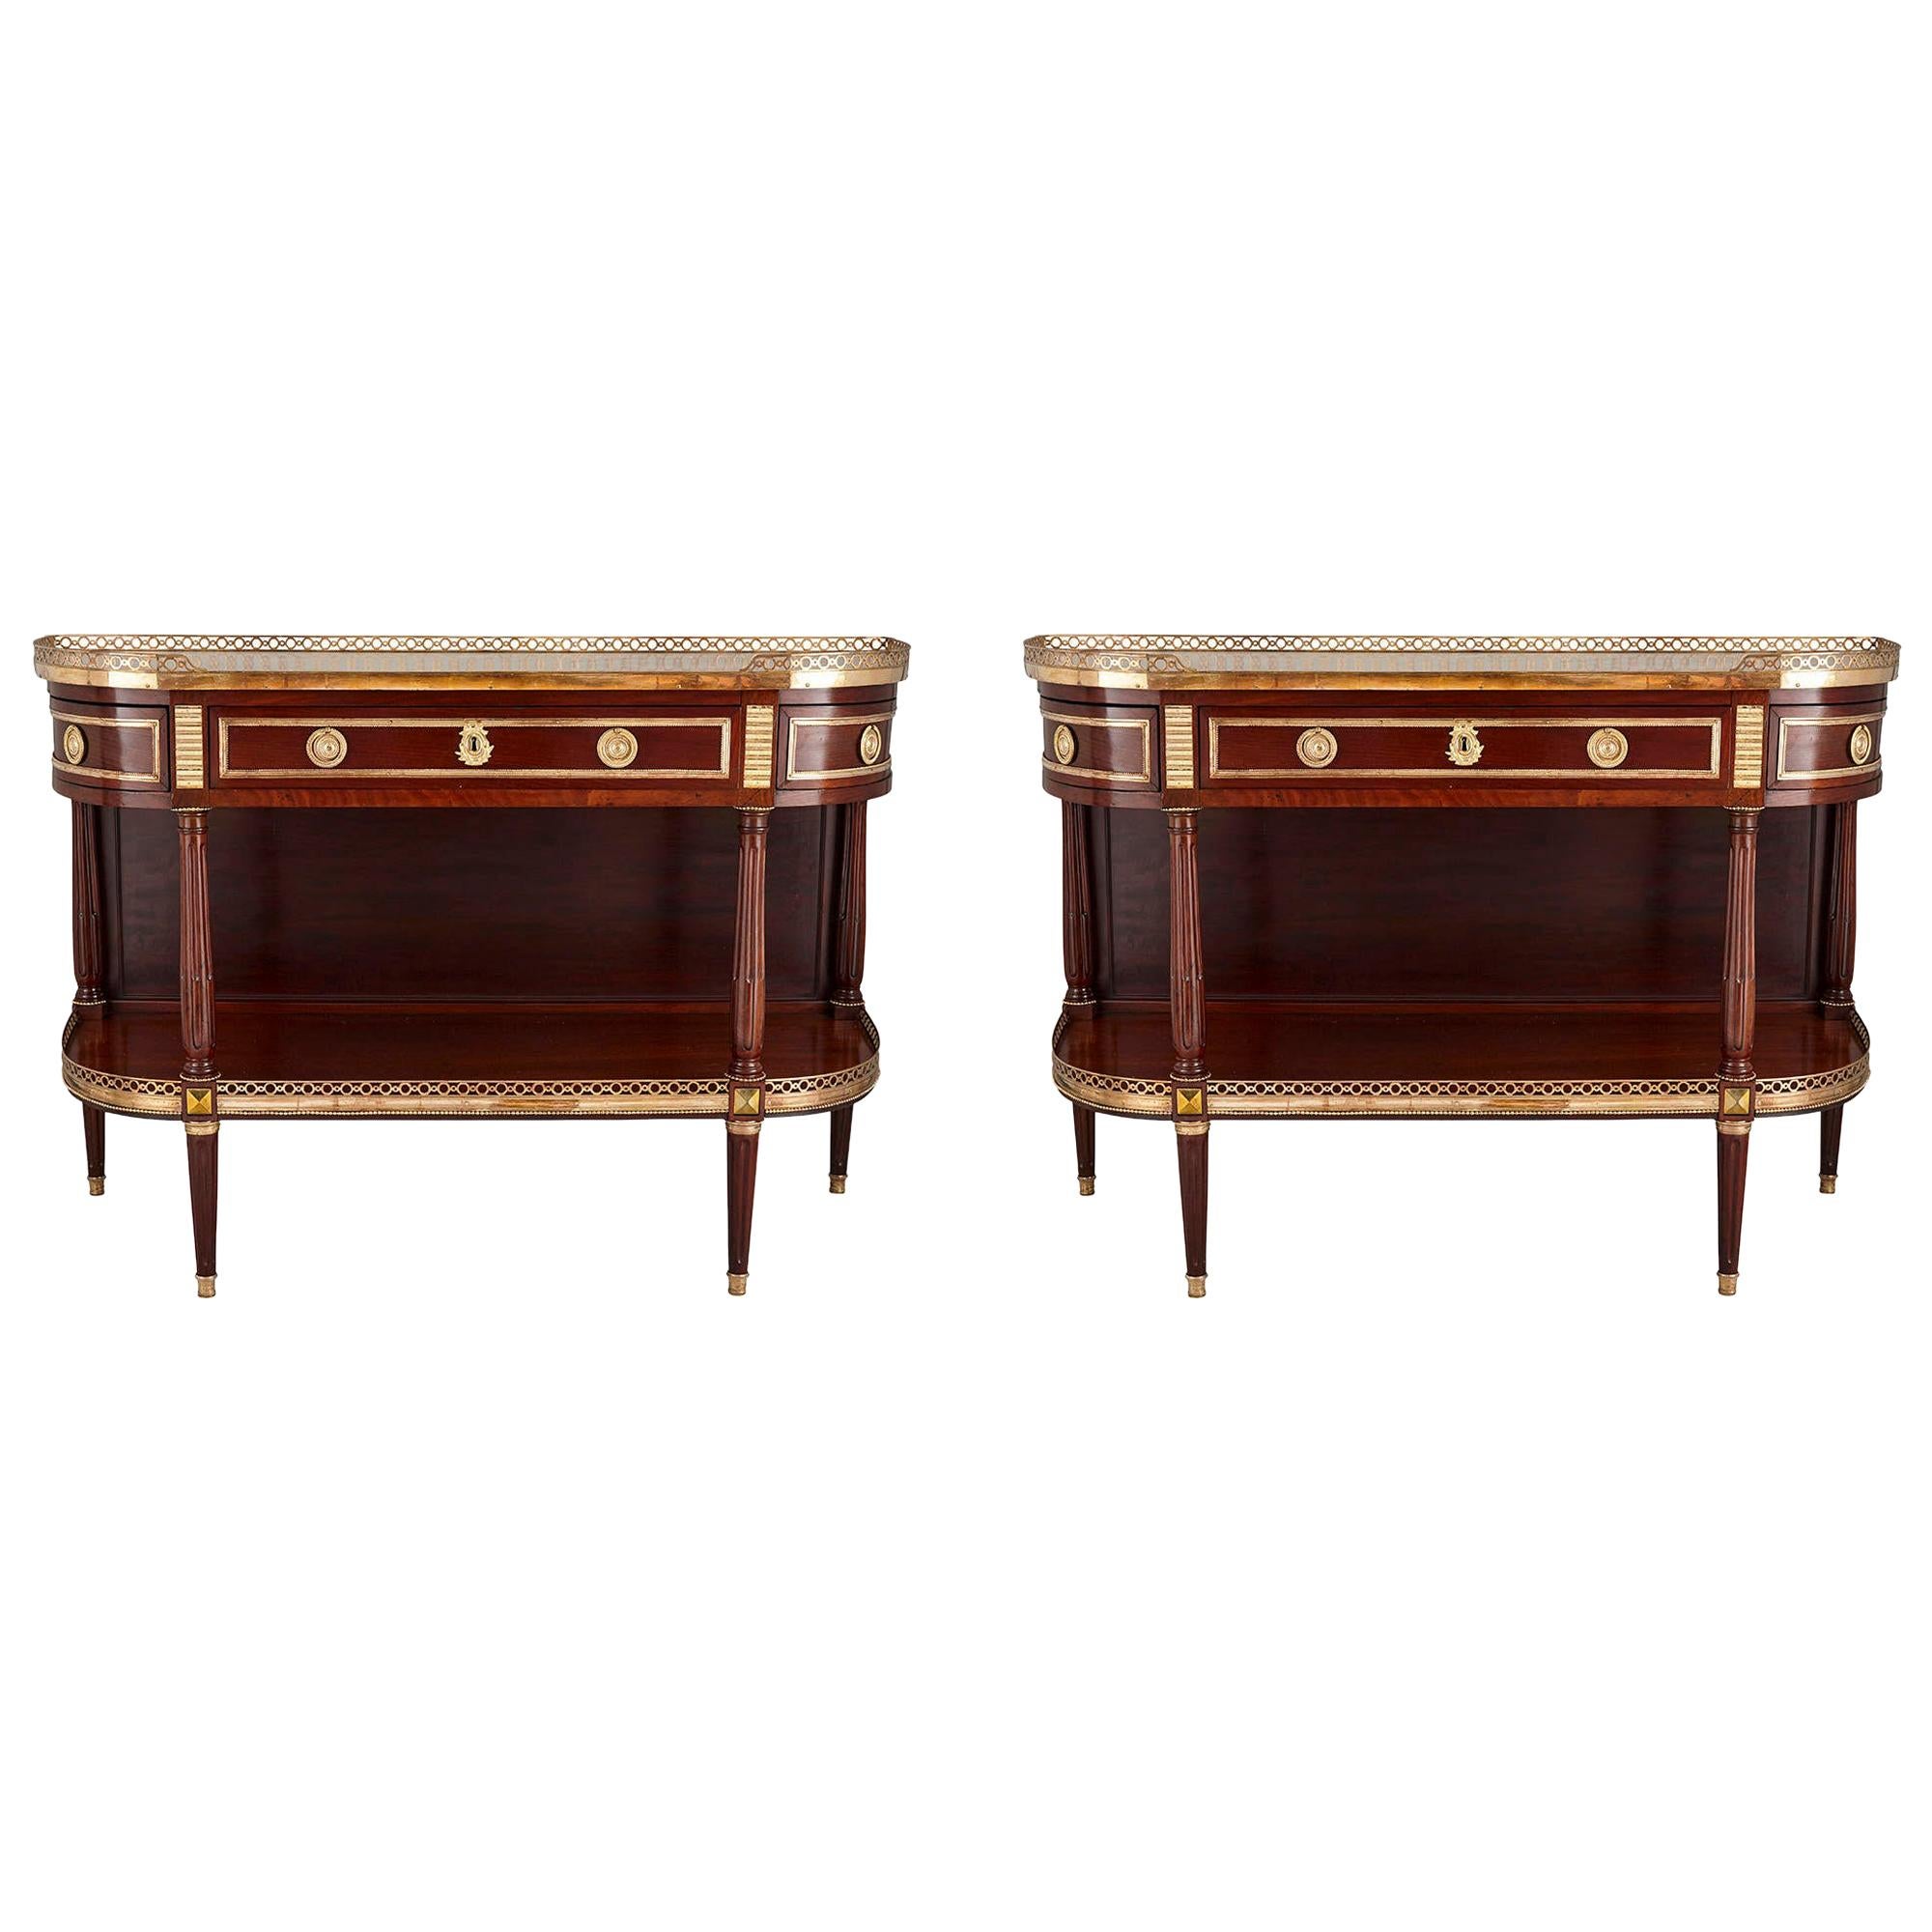 Pair of Neoclassical Style Gilt Bronze Mounted French Consoles